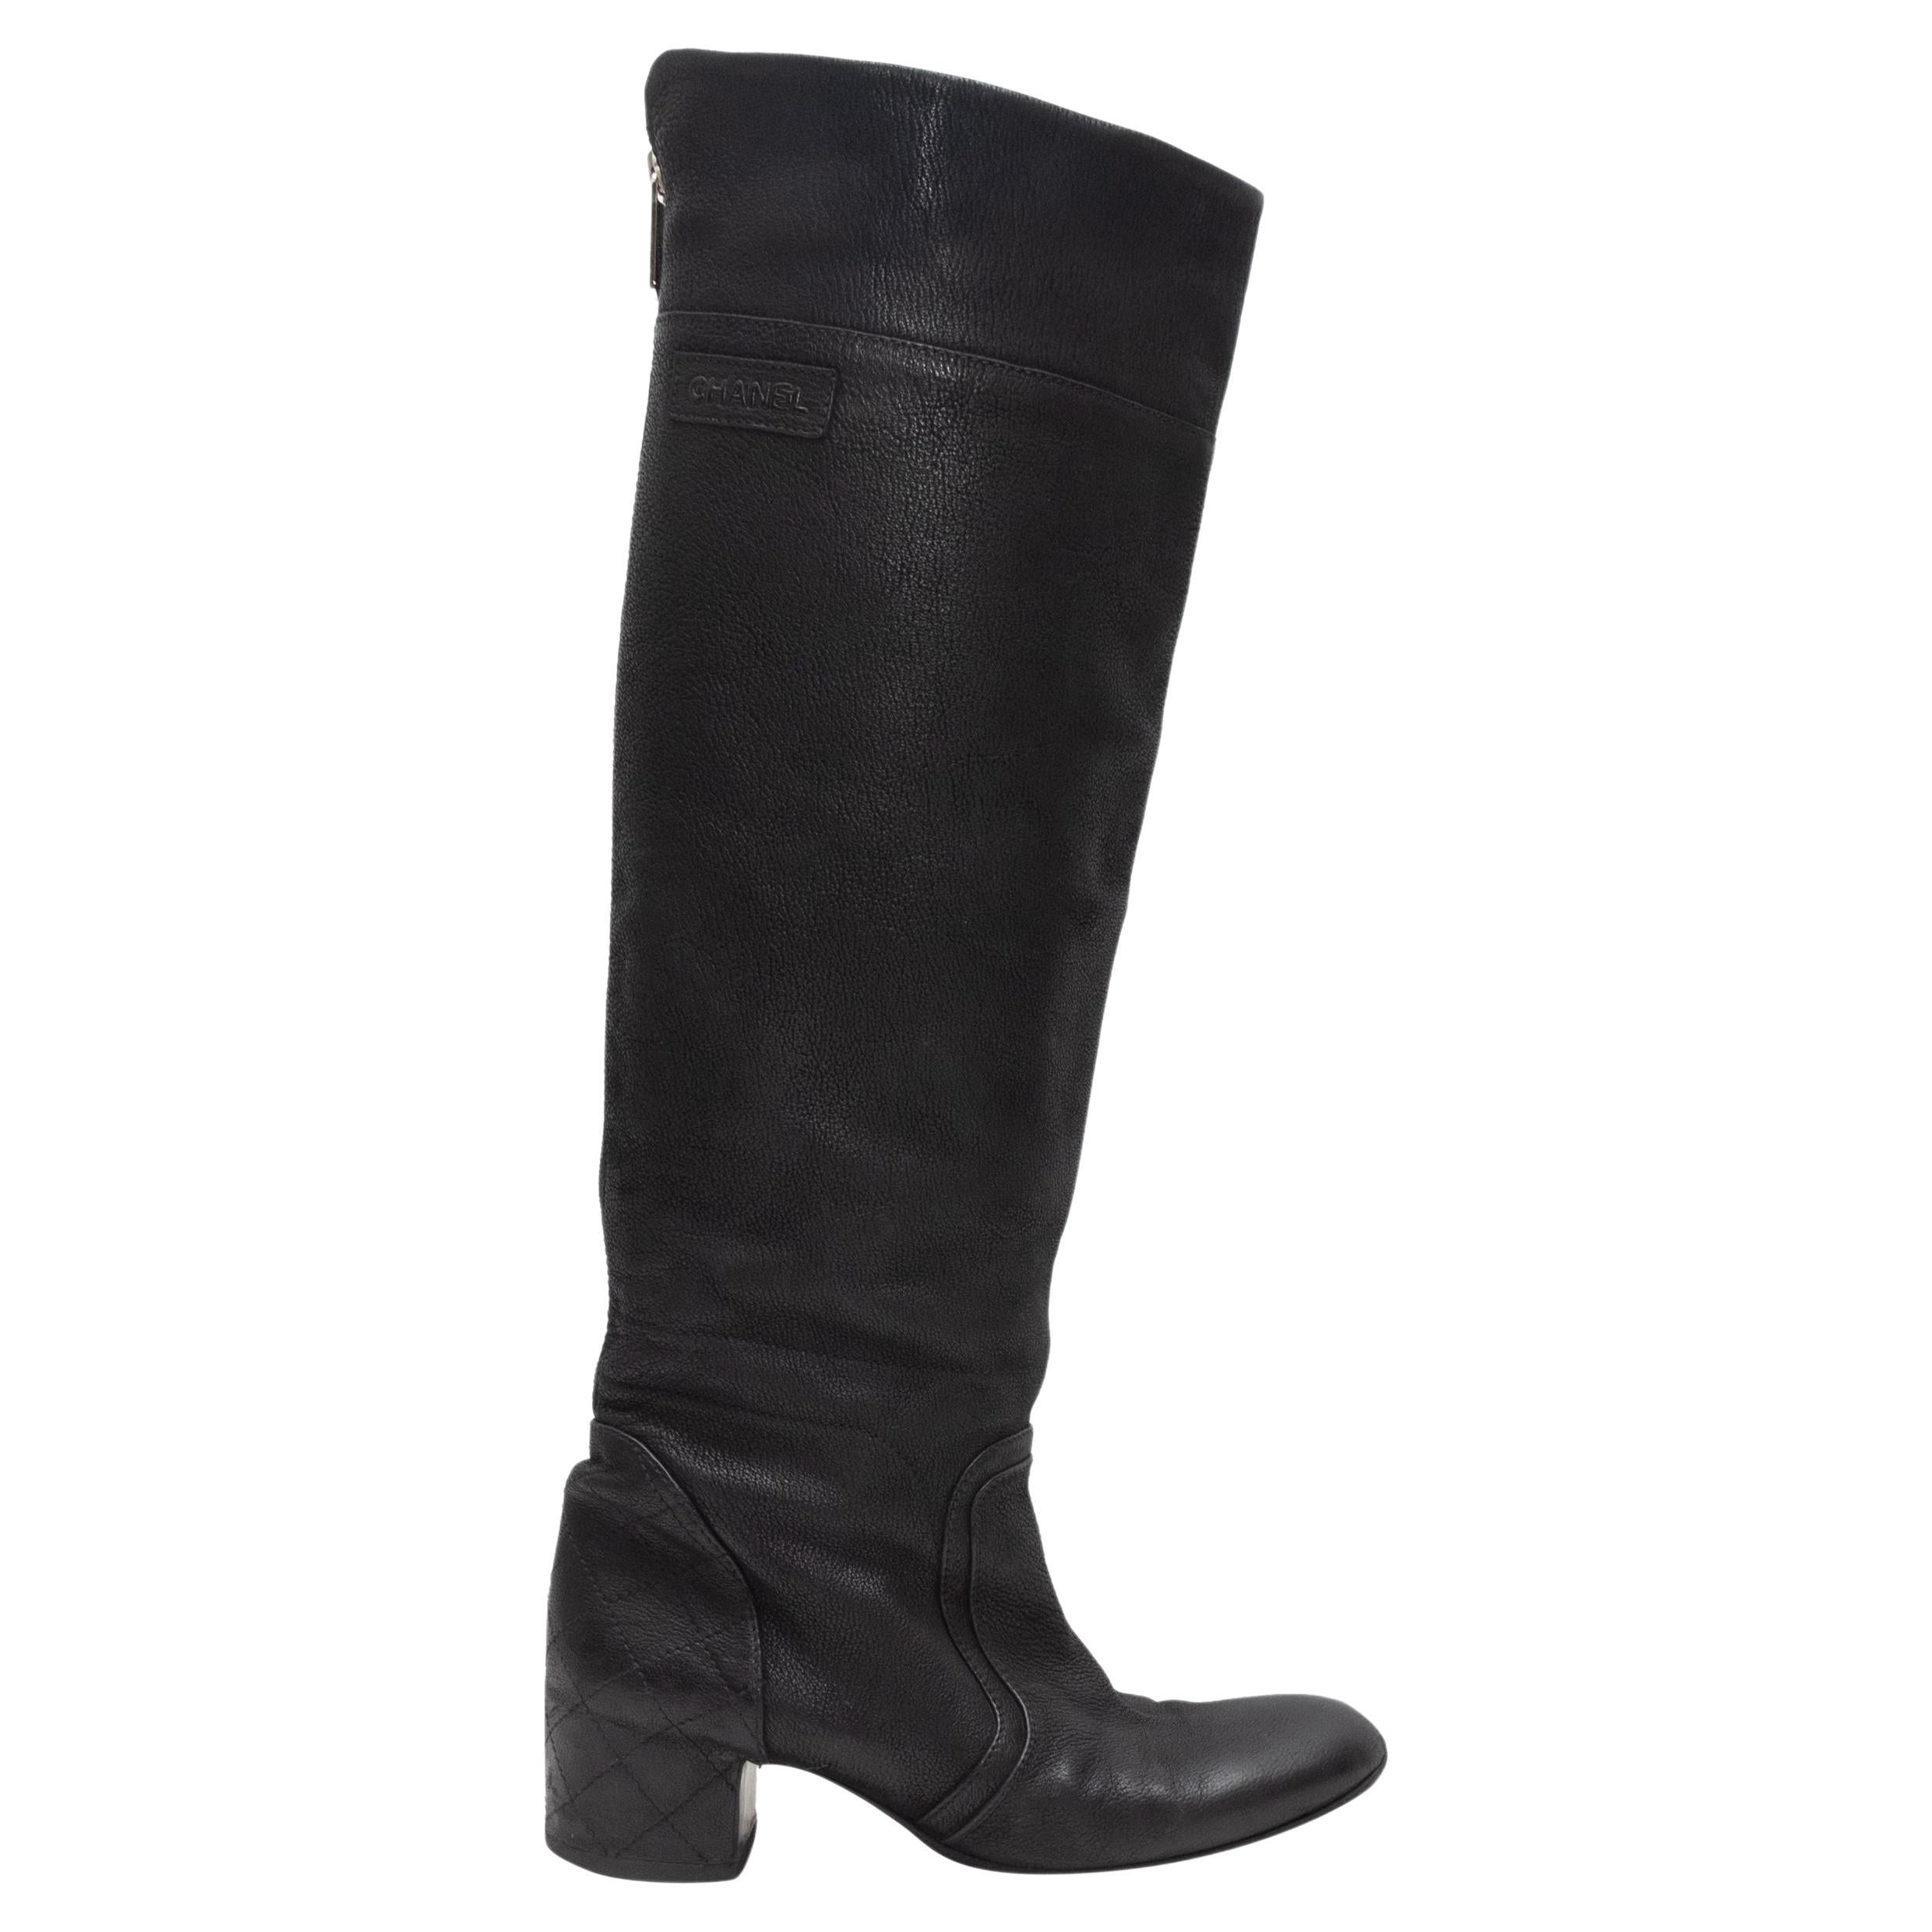 Chanel Black Knee-High Leather Boots